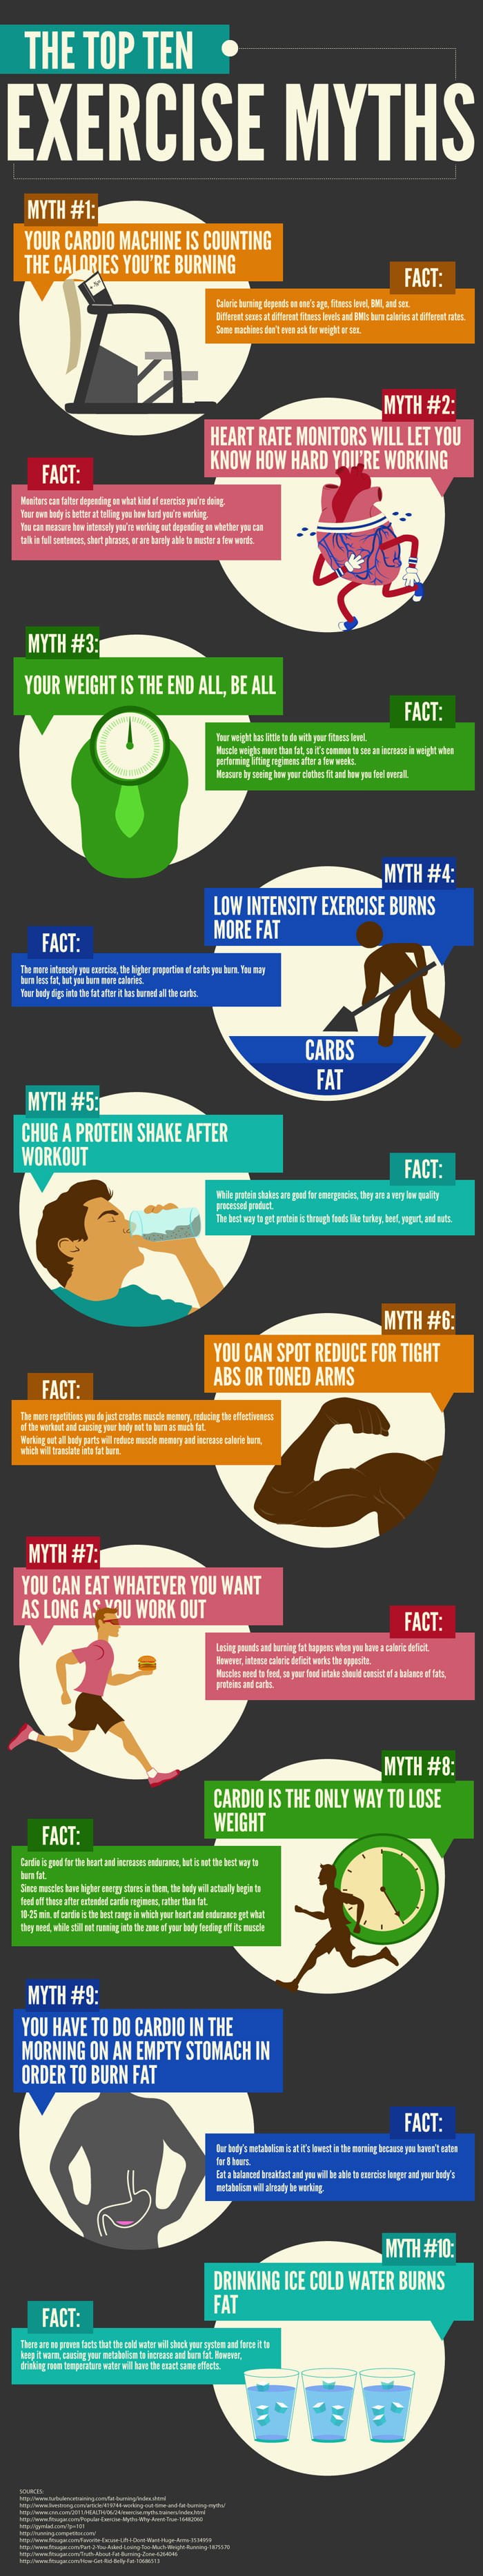 Top 10 Exercise Myths Infographic